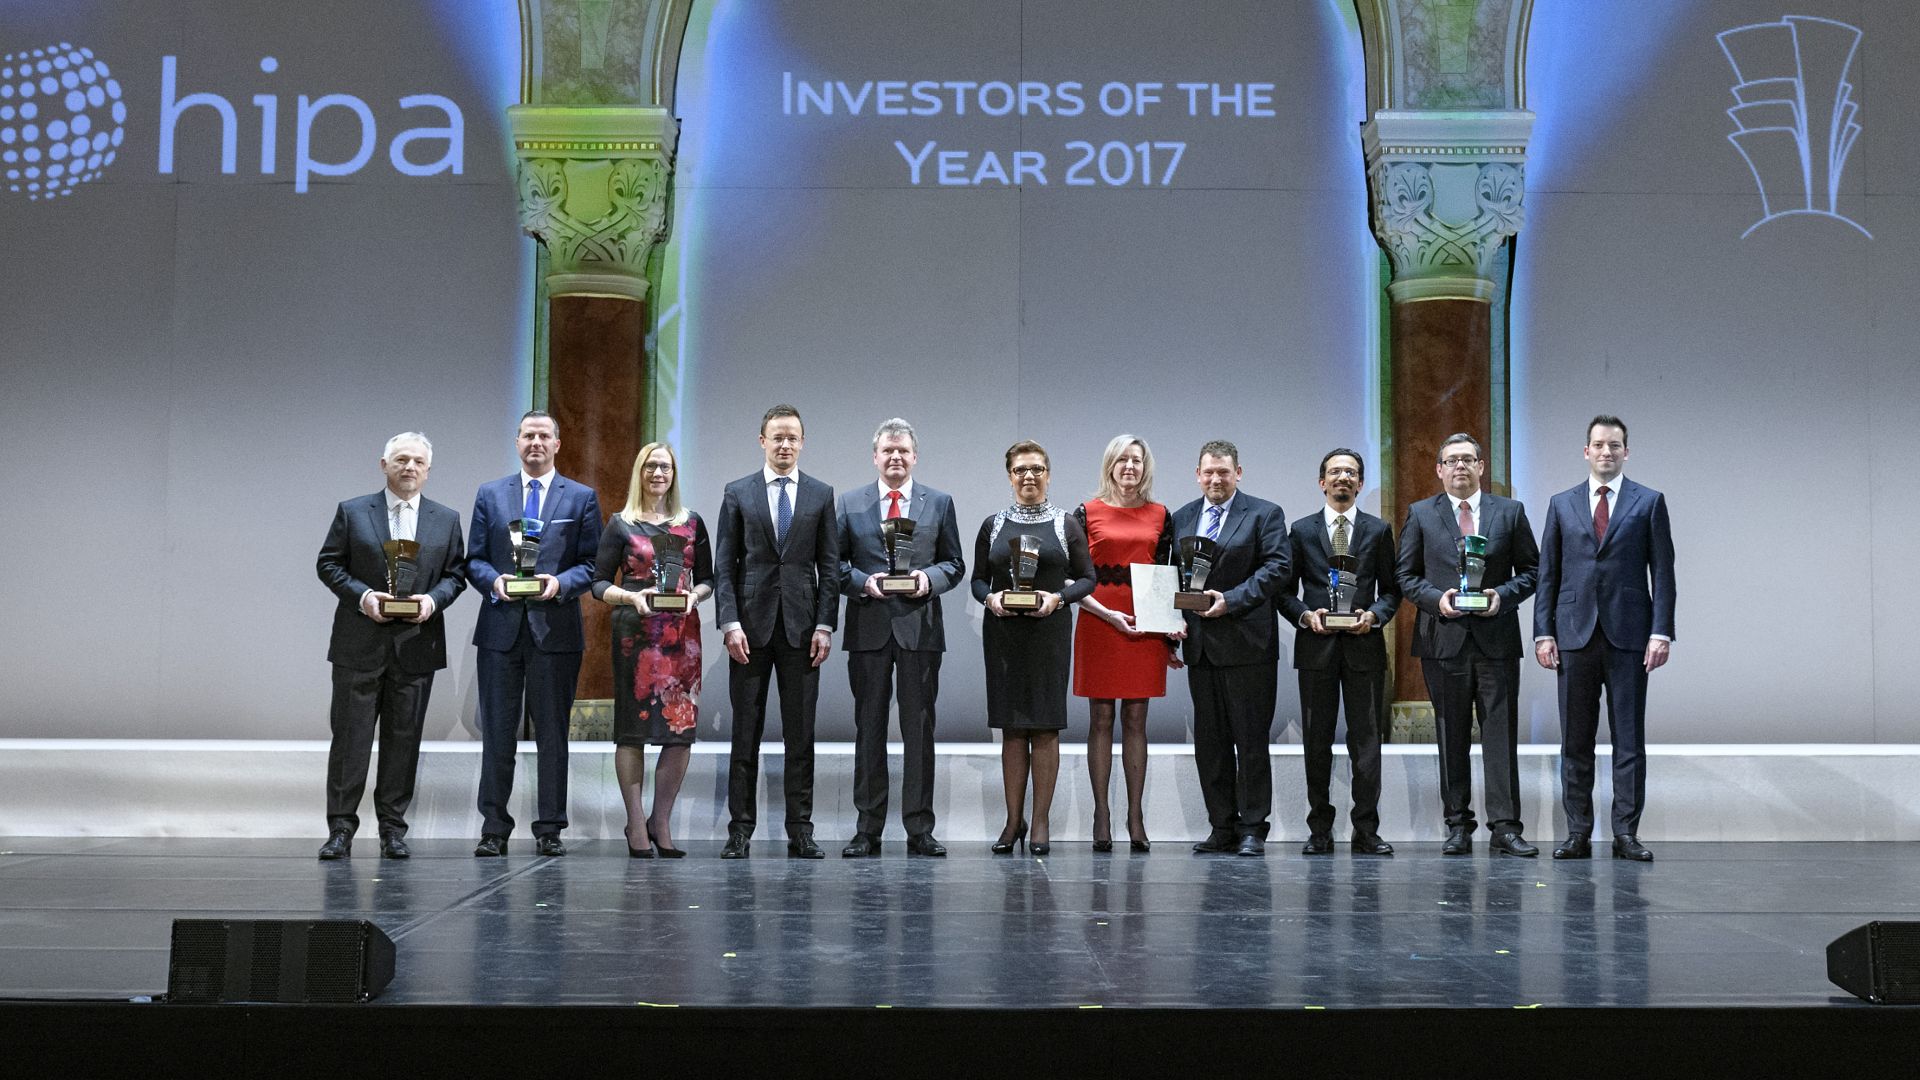 Investors of the Year 2017